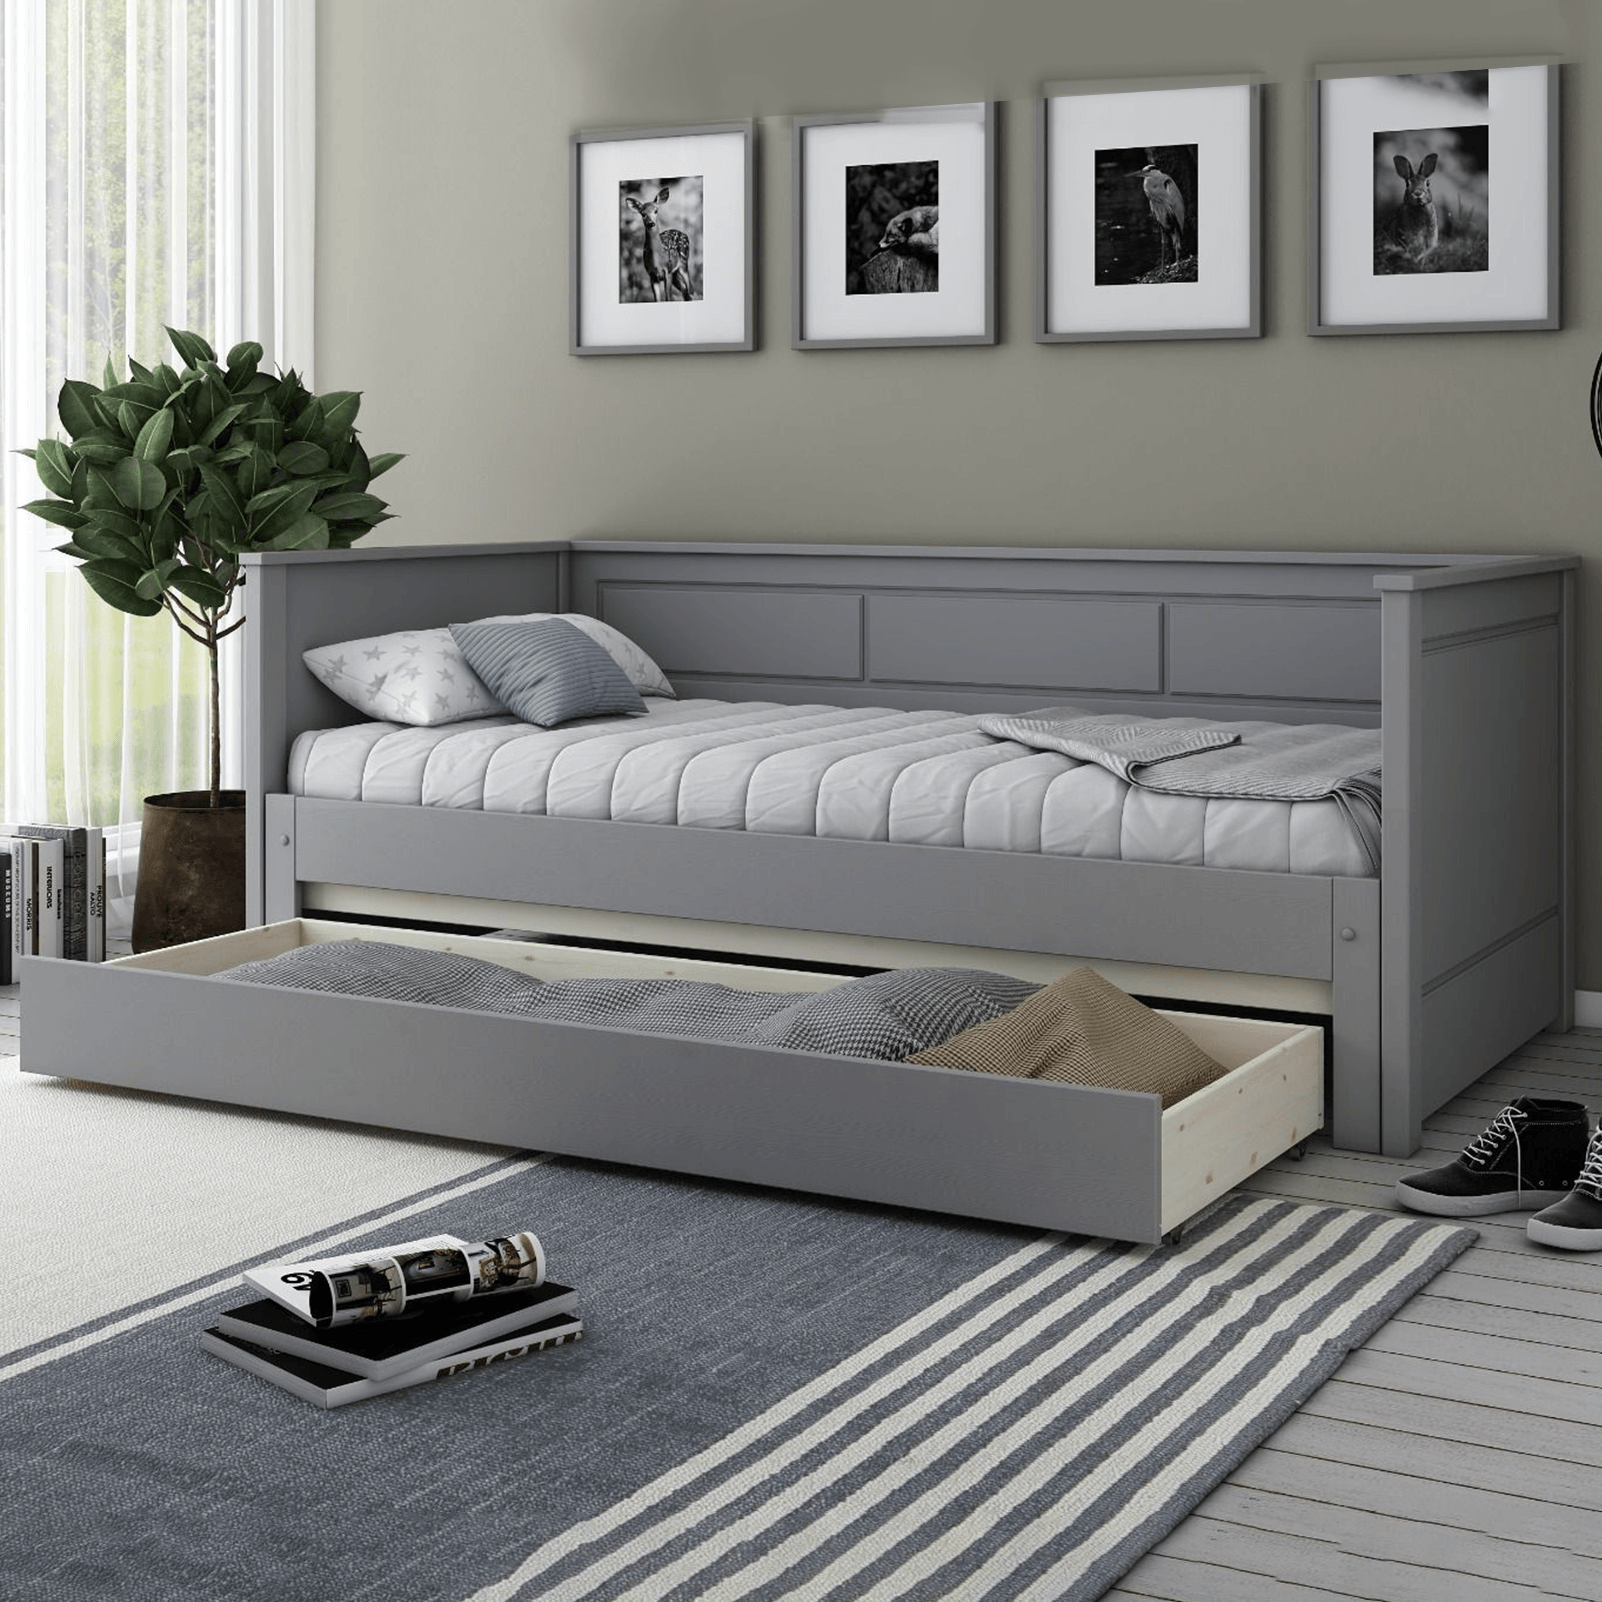 Erika Luxury Guest Bed Grey Solid Wood with Mattress Bundle - Complete Comfort Beds